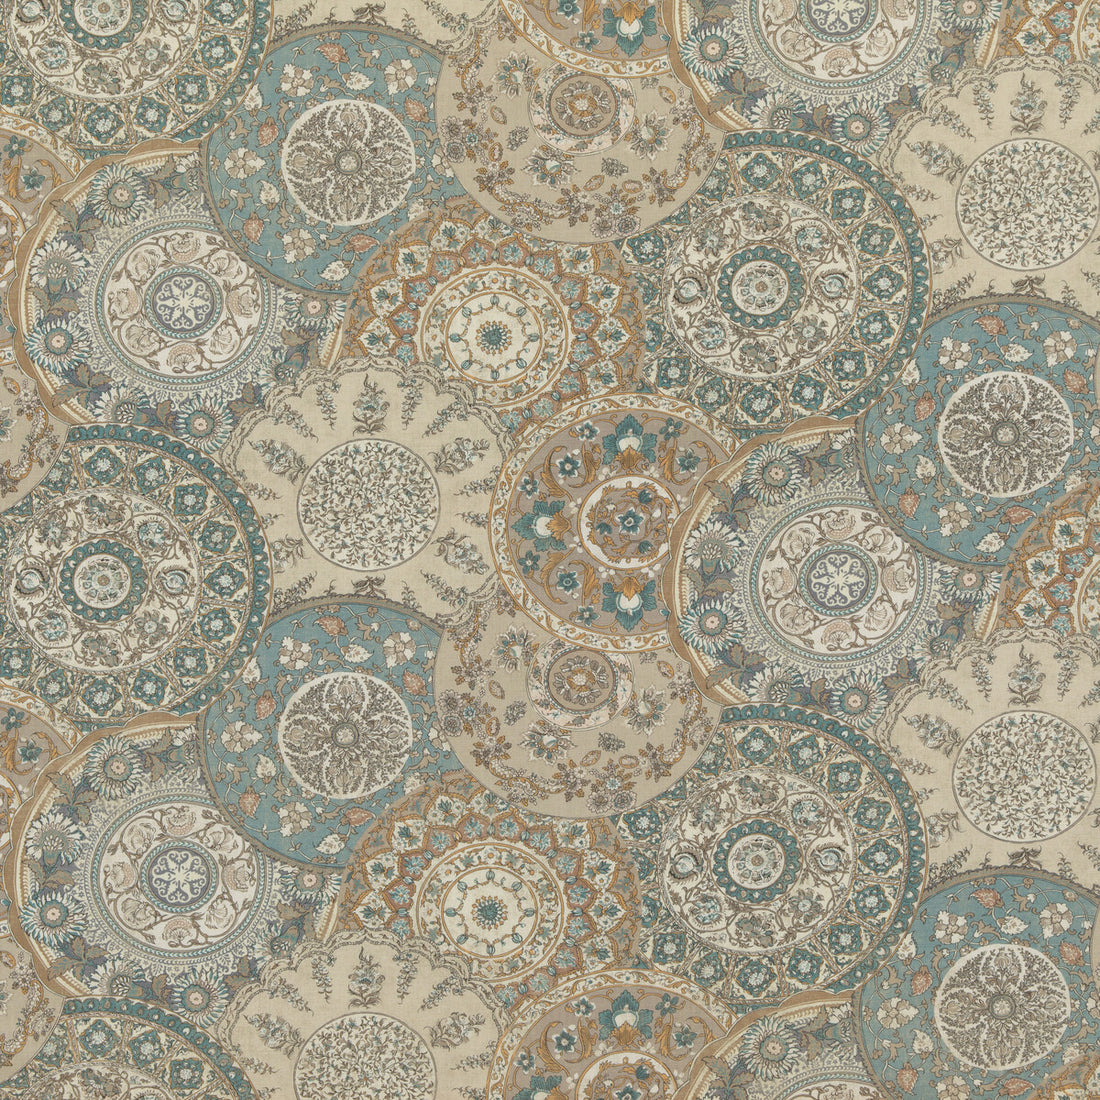 Imari fabric in soft blue color - pattern BP10856.2.0 - by G P &amp; J Baker in the Chifu collection